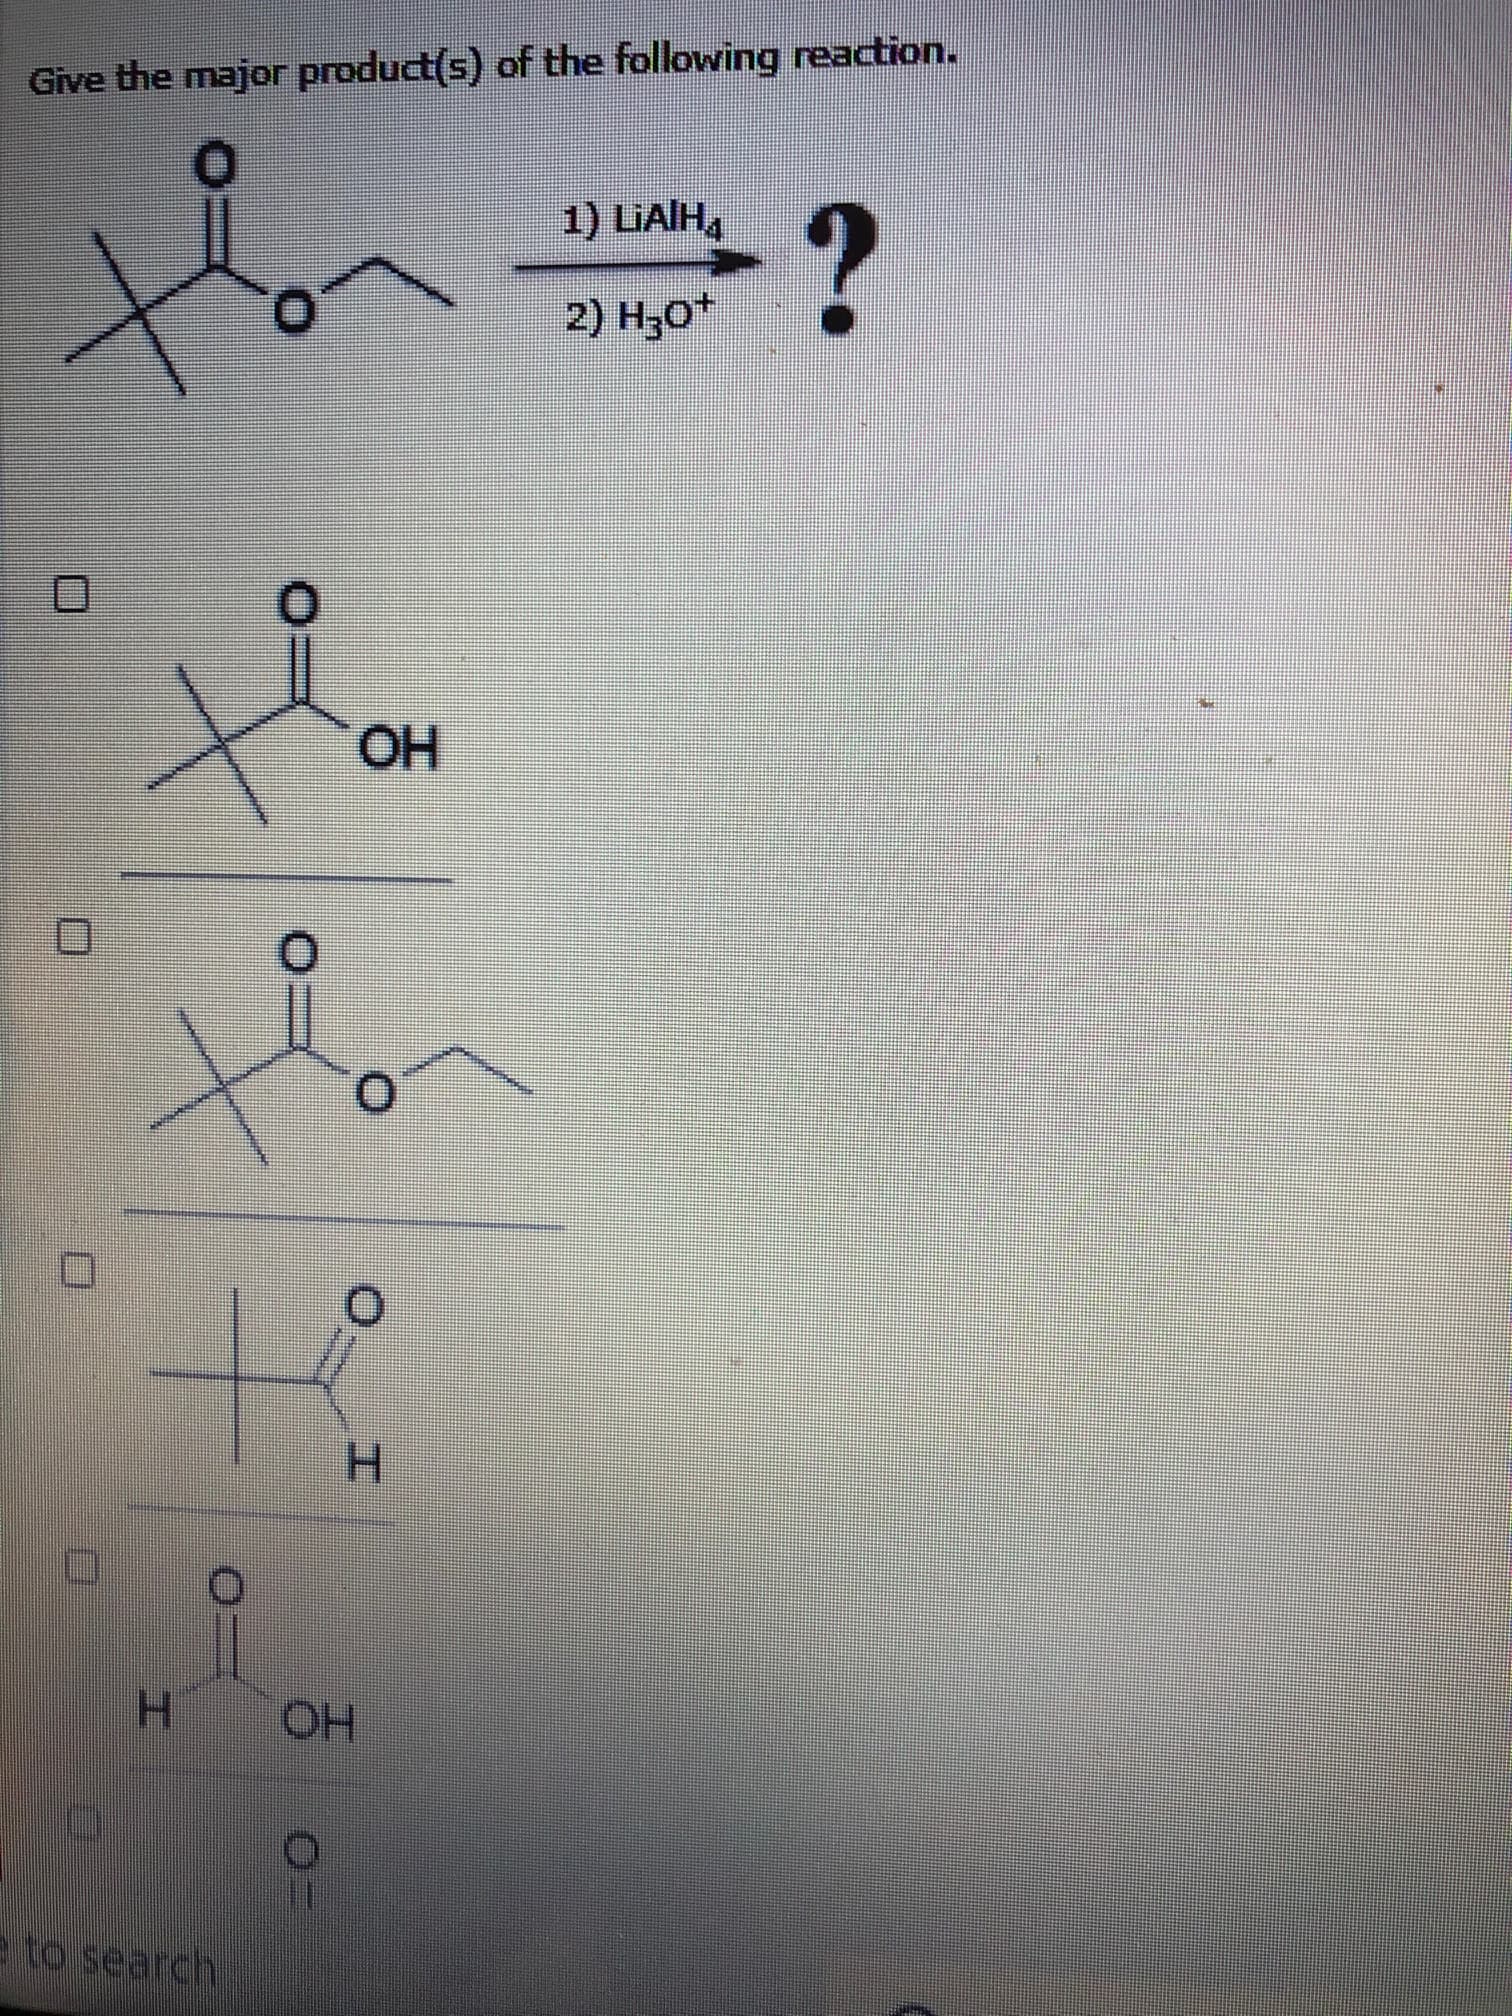 Give the major product(s) of the following reaction.
1) LIAIH,
2) H;0*
